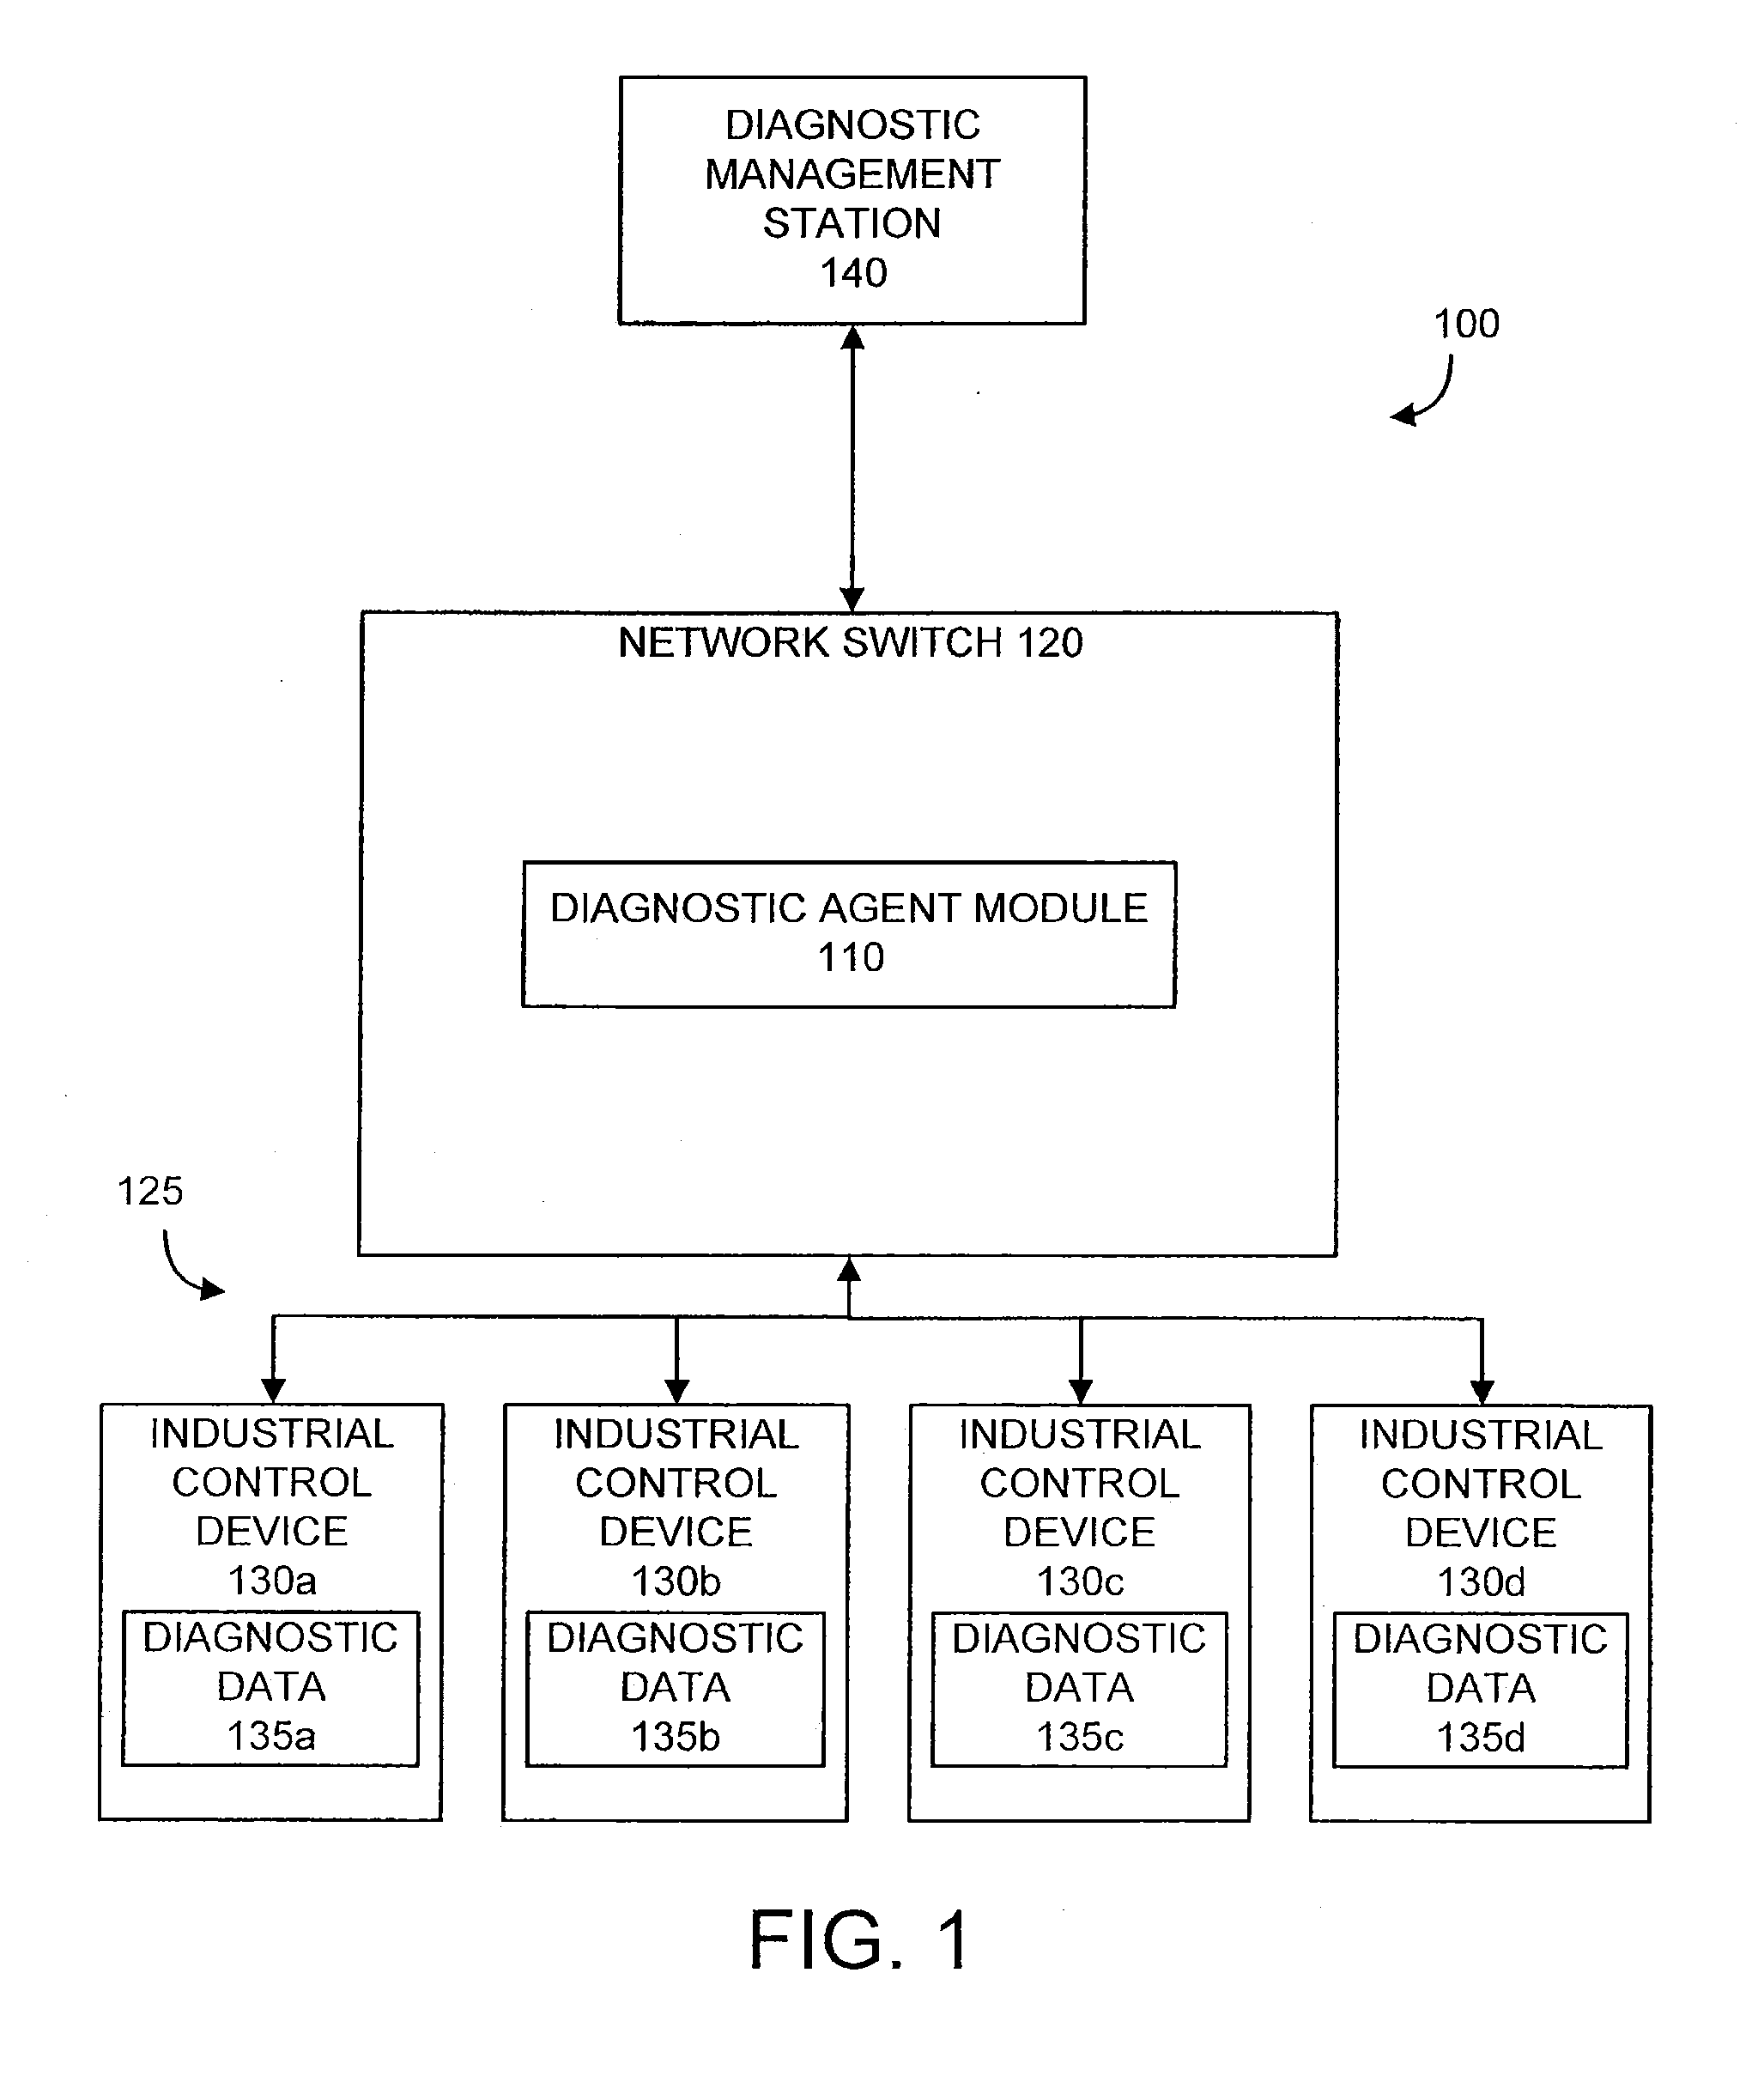 Diagnostic Module For Distributed Industrial Network Including Industrial Control Devices